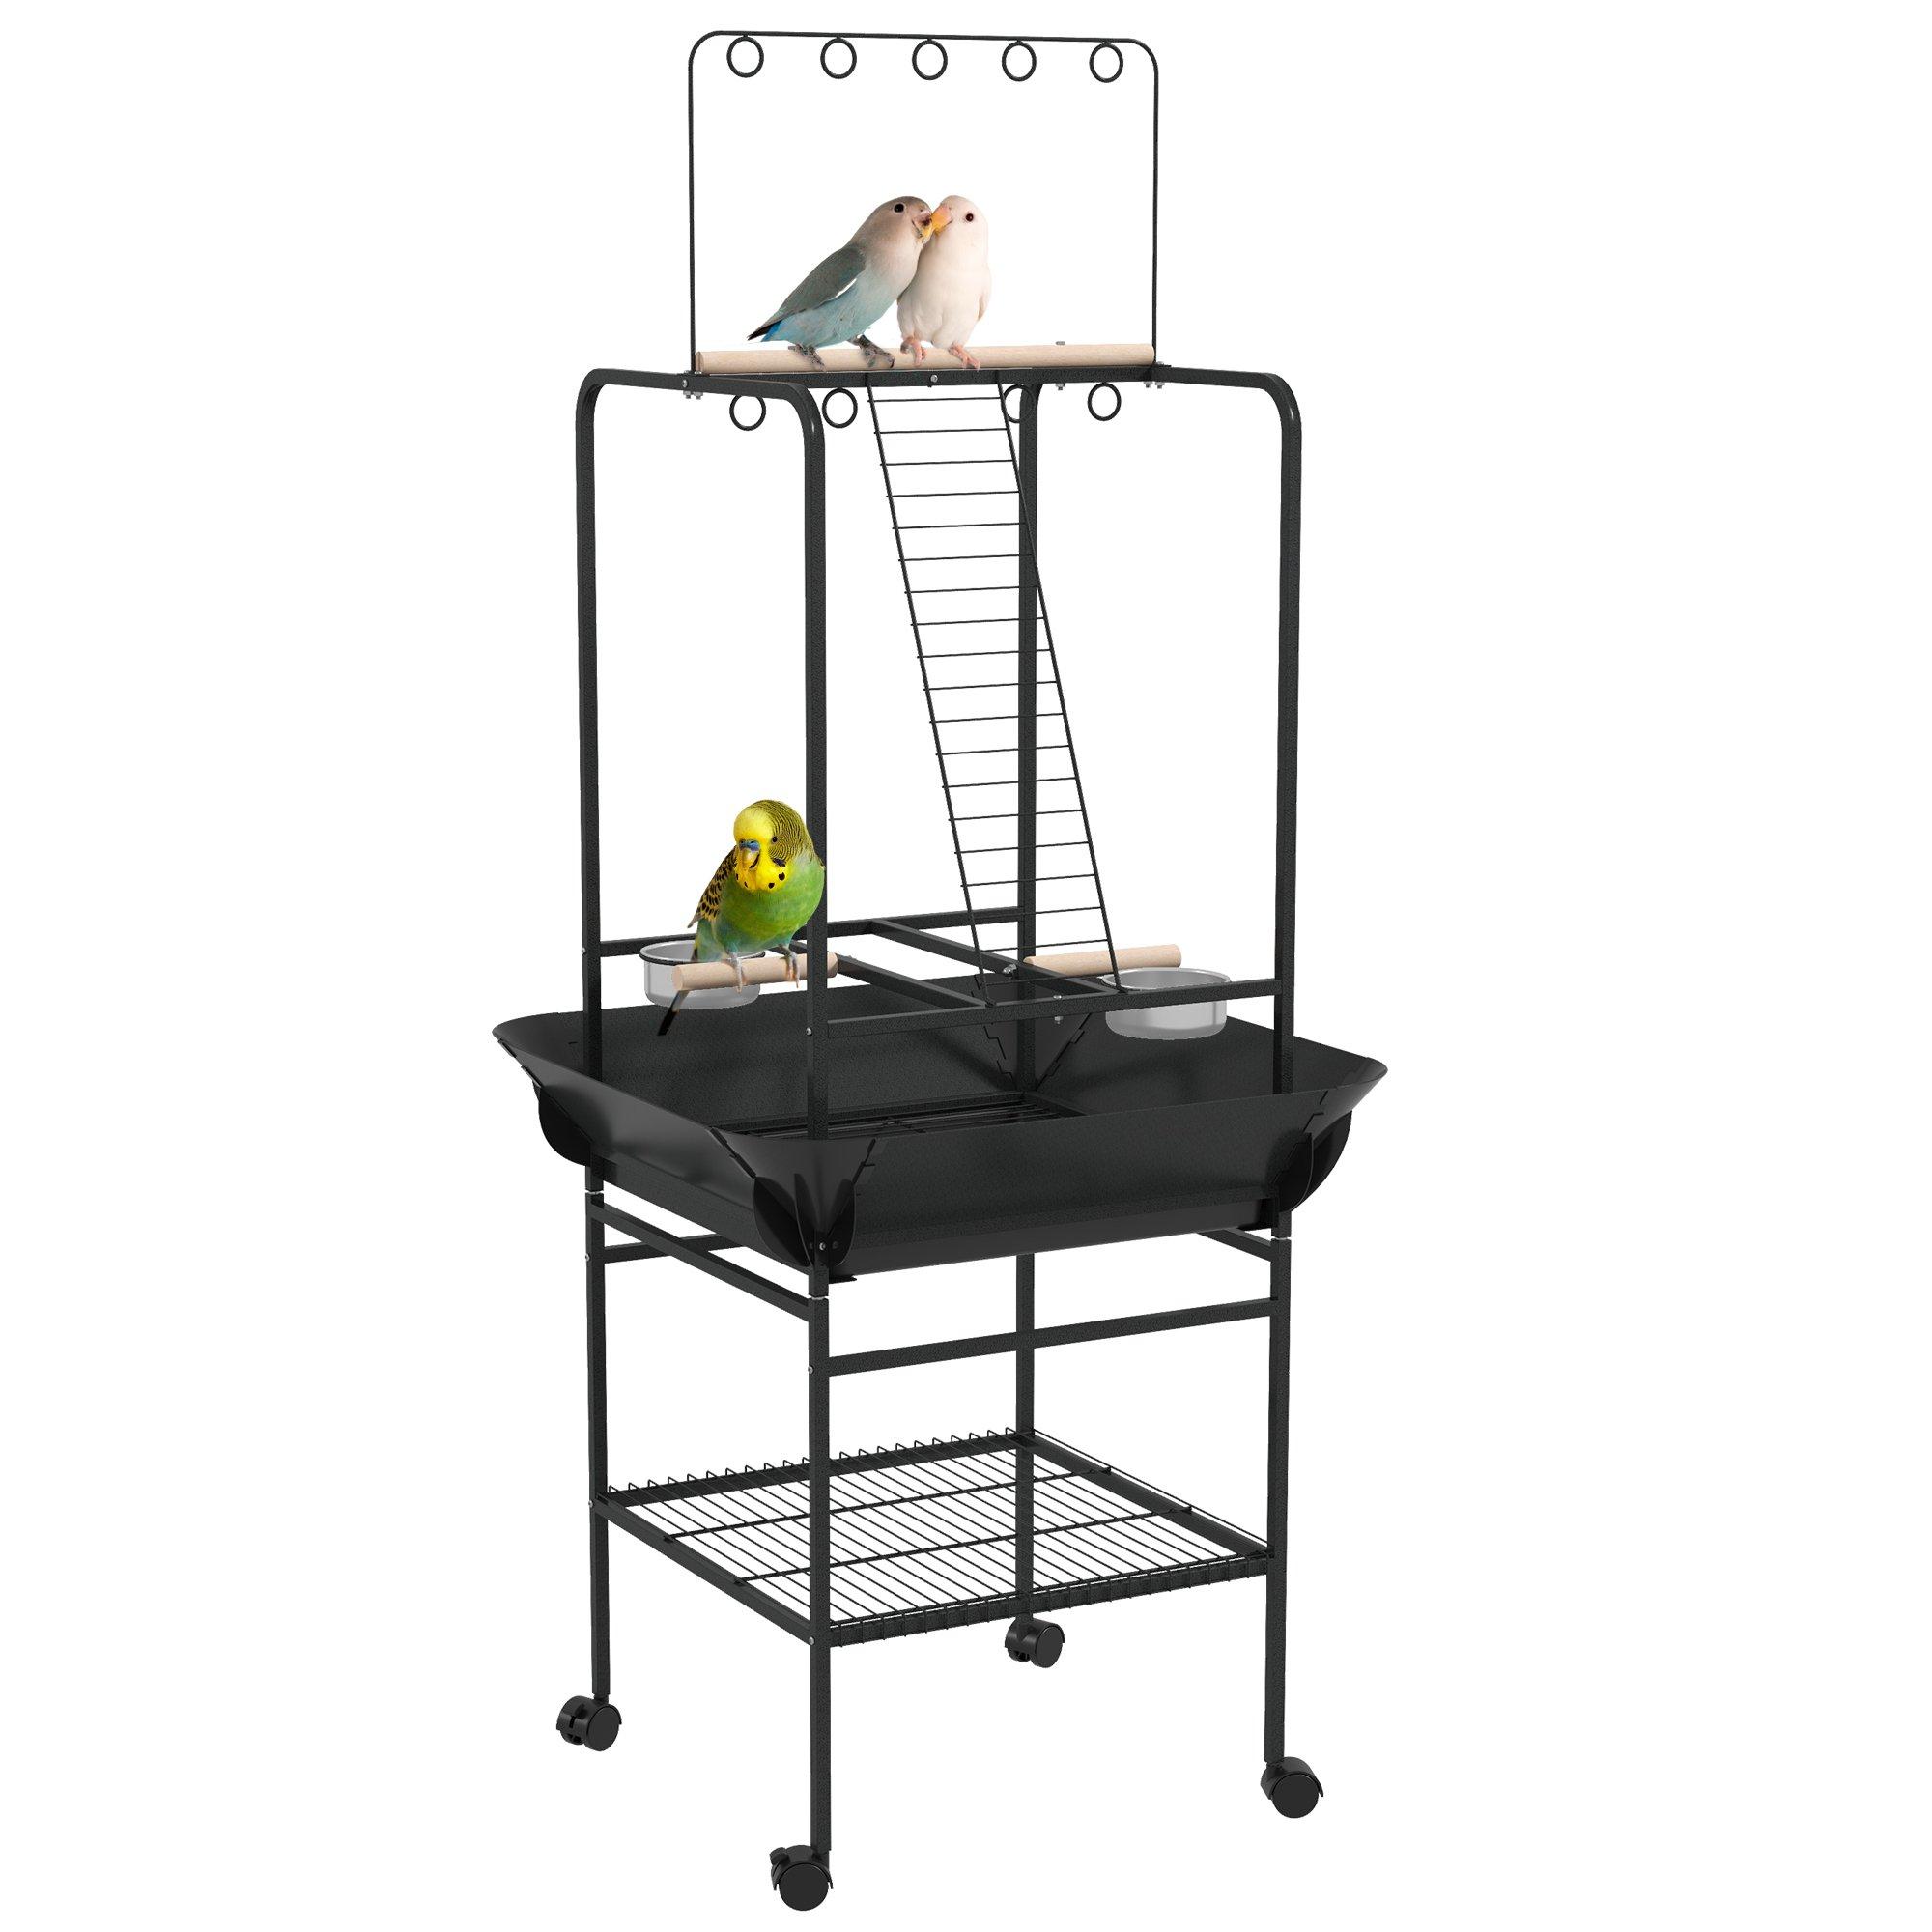 Bird Feeder Stand with Wheels, Perches, Stainless Steel Feed Bowls, Trays